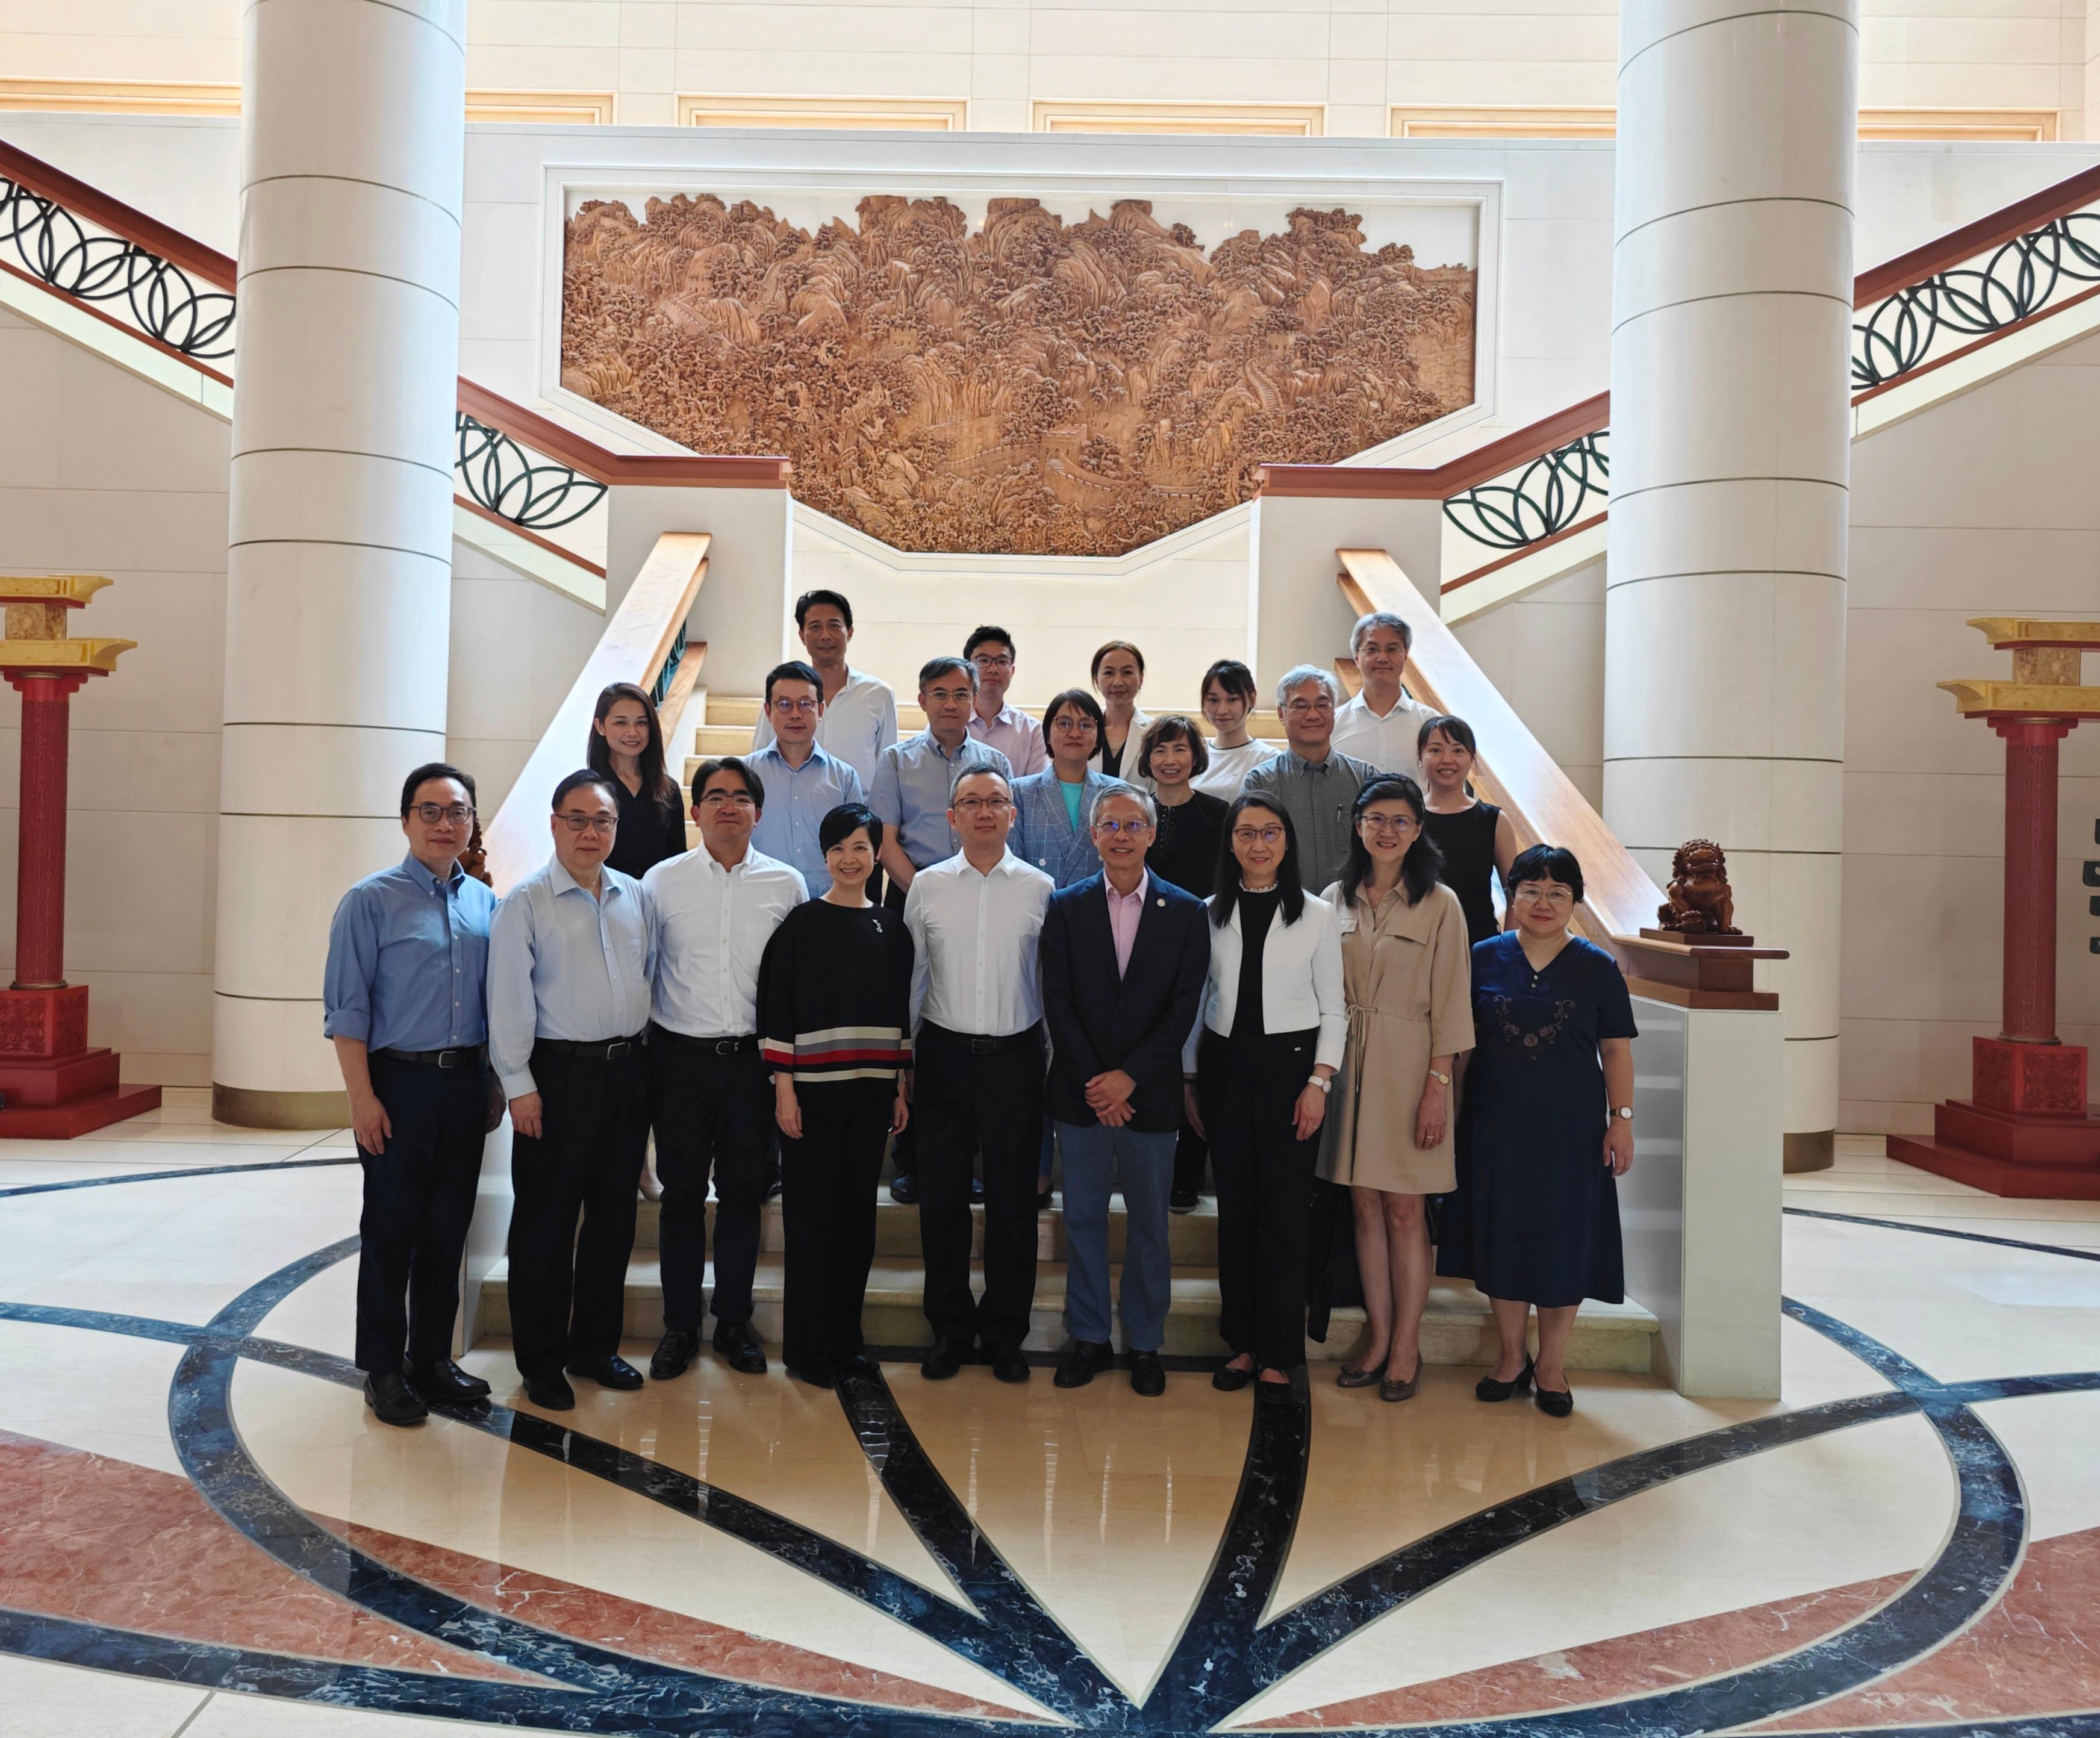 The Secretary for Housing, Ms Winnie Ho, was on the third day of her visit to Singapore yesterday (August 24). Ms Ho (first row, fourth left) and the Chargé d'Affaires of the Chinese Embassy in the Republic of Singapore, Mr Zhu Jing (first row, centre), are pictured with members of the delegation including members of the Hong Kong Housing Authority Strategic Planning Committee Dr Johnnie Chan (first row, second left), Ms Cleresa Wong (first row, third right), Ms Melissa Pang (first row, second right), Dr Billy Mak (second row, third left), Ms Serena Lau (second row, centre), Ms Cissy Chan (second row, third right); the Chairman of the Hong Kong Housing Society (HKHS), Mr Walter Chan (first row, fourth right); the Vice-Chairman of the HKHS, Professor Ling Kar-kan (second row, second right); and the Chief Executive Officer and Executive Director of the HKHS, Mr James Chan (second row, second left).